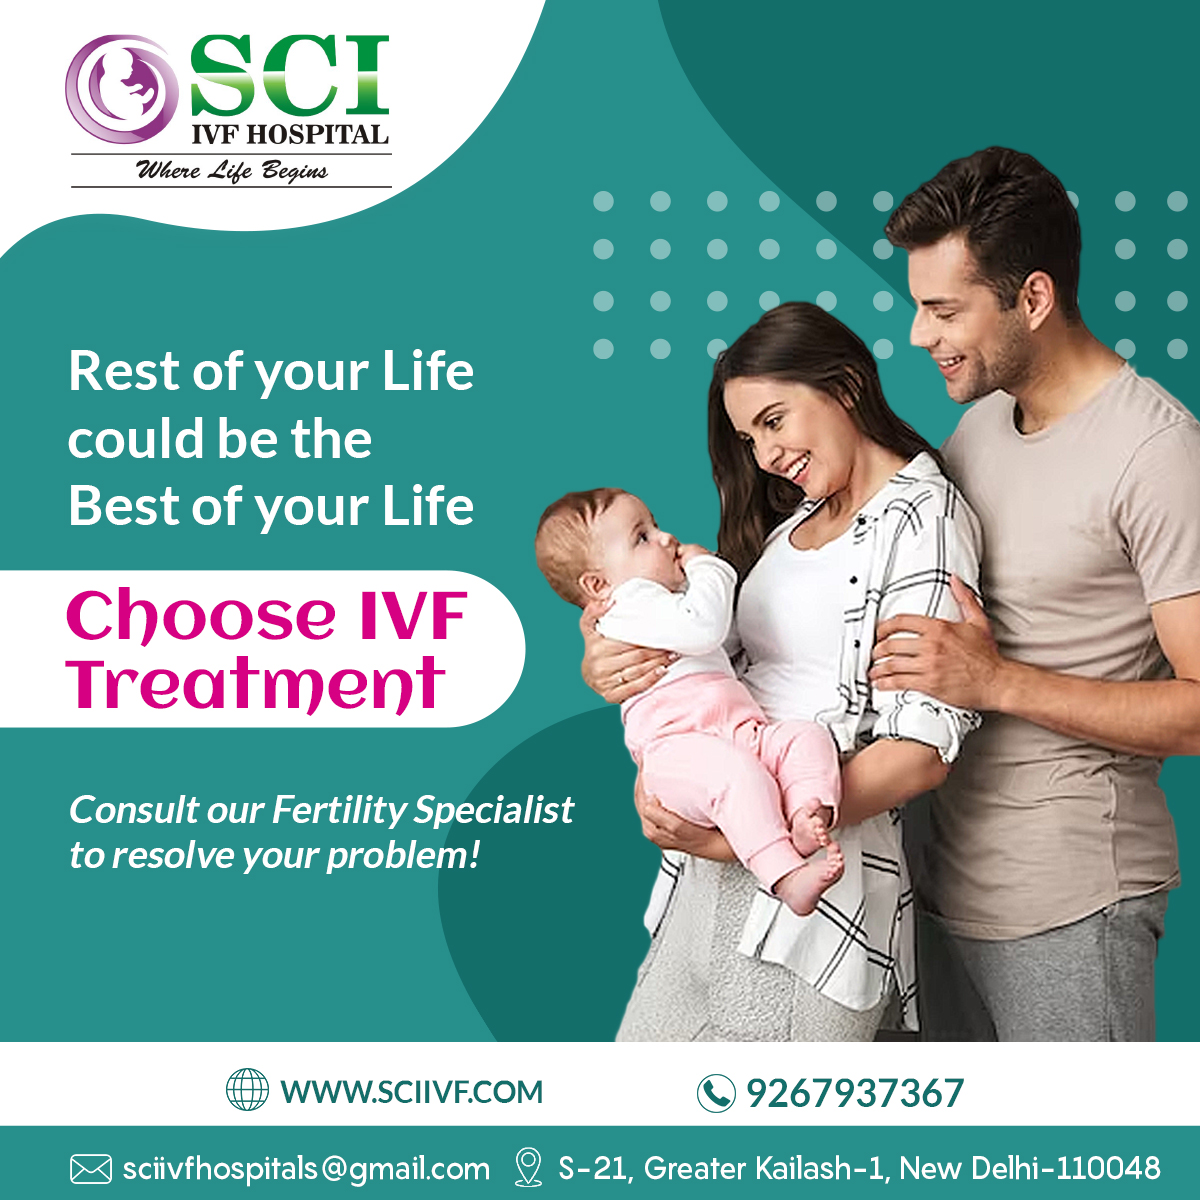 Unlock the doors to parenthood with SCI IVF Hospital's advanced IVF treatment options. Our dedicated specialists are here to provide personalized care. Book a free IVF consultation now! sciivf.com #IVF #IVFSuccess #SCIIVF #Parenthood #Motherhood #Fatherhood